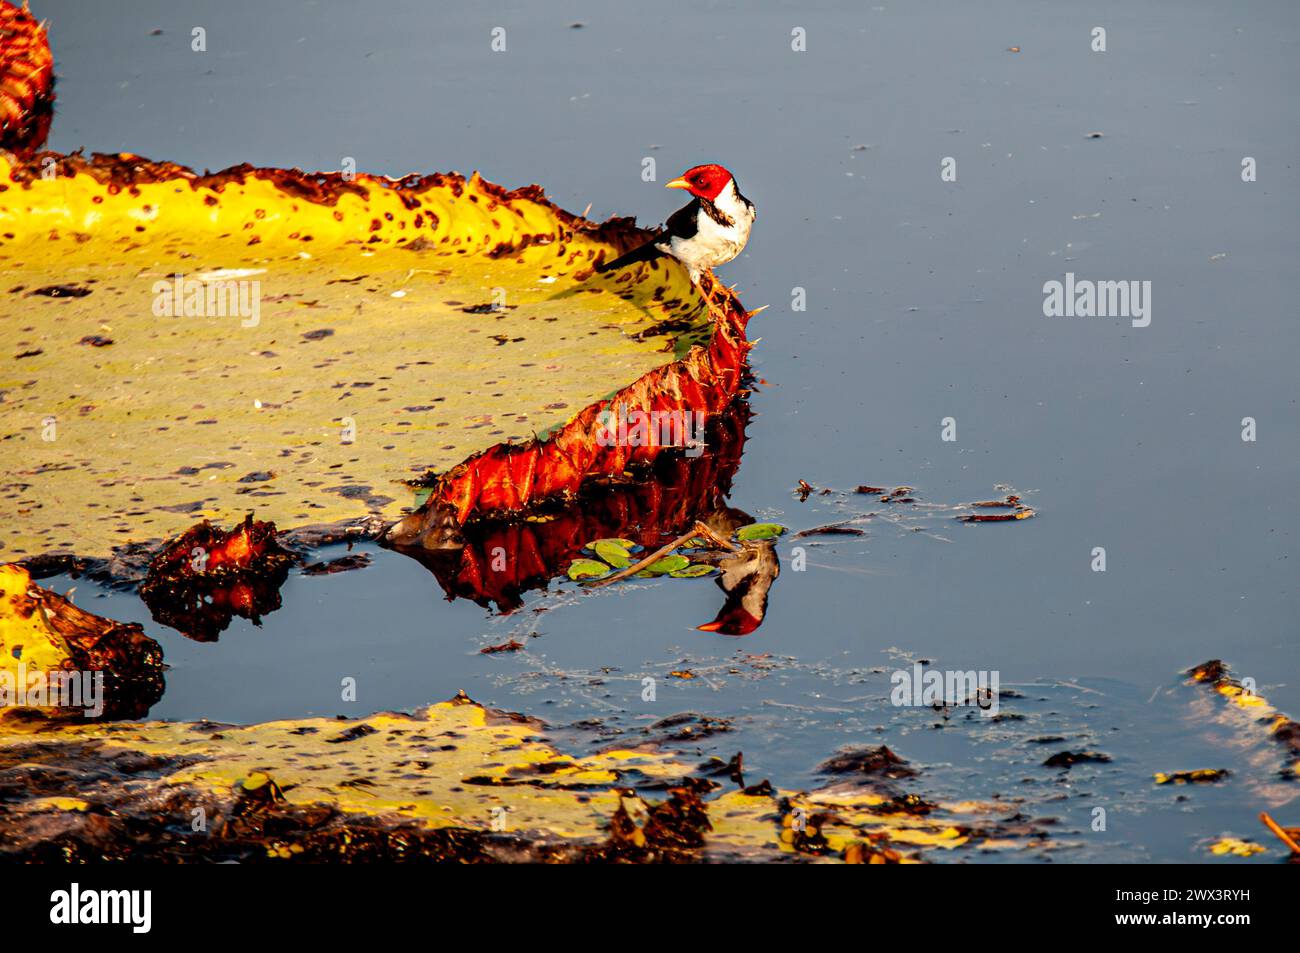 Yellow-billed Cardinal, Paroaria capitata, perched on a water lily pad in the Pantanal, Mato Grosso, Brazil Stock Photo